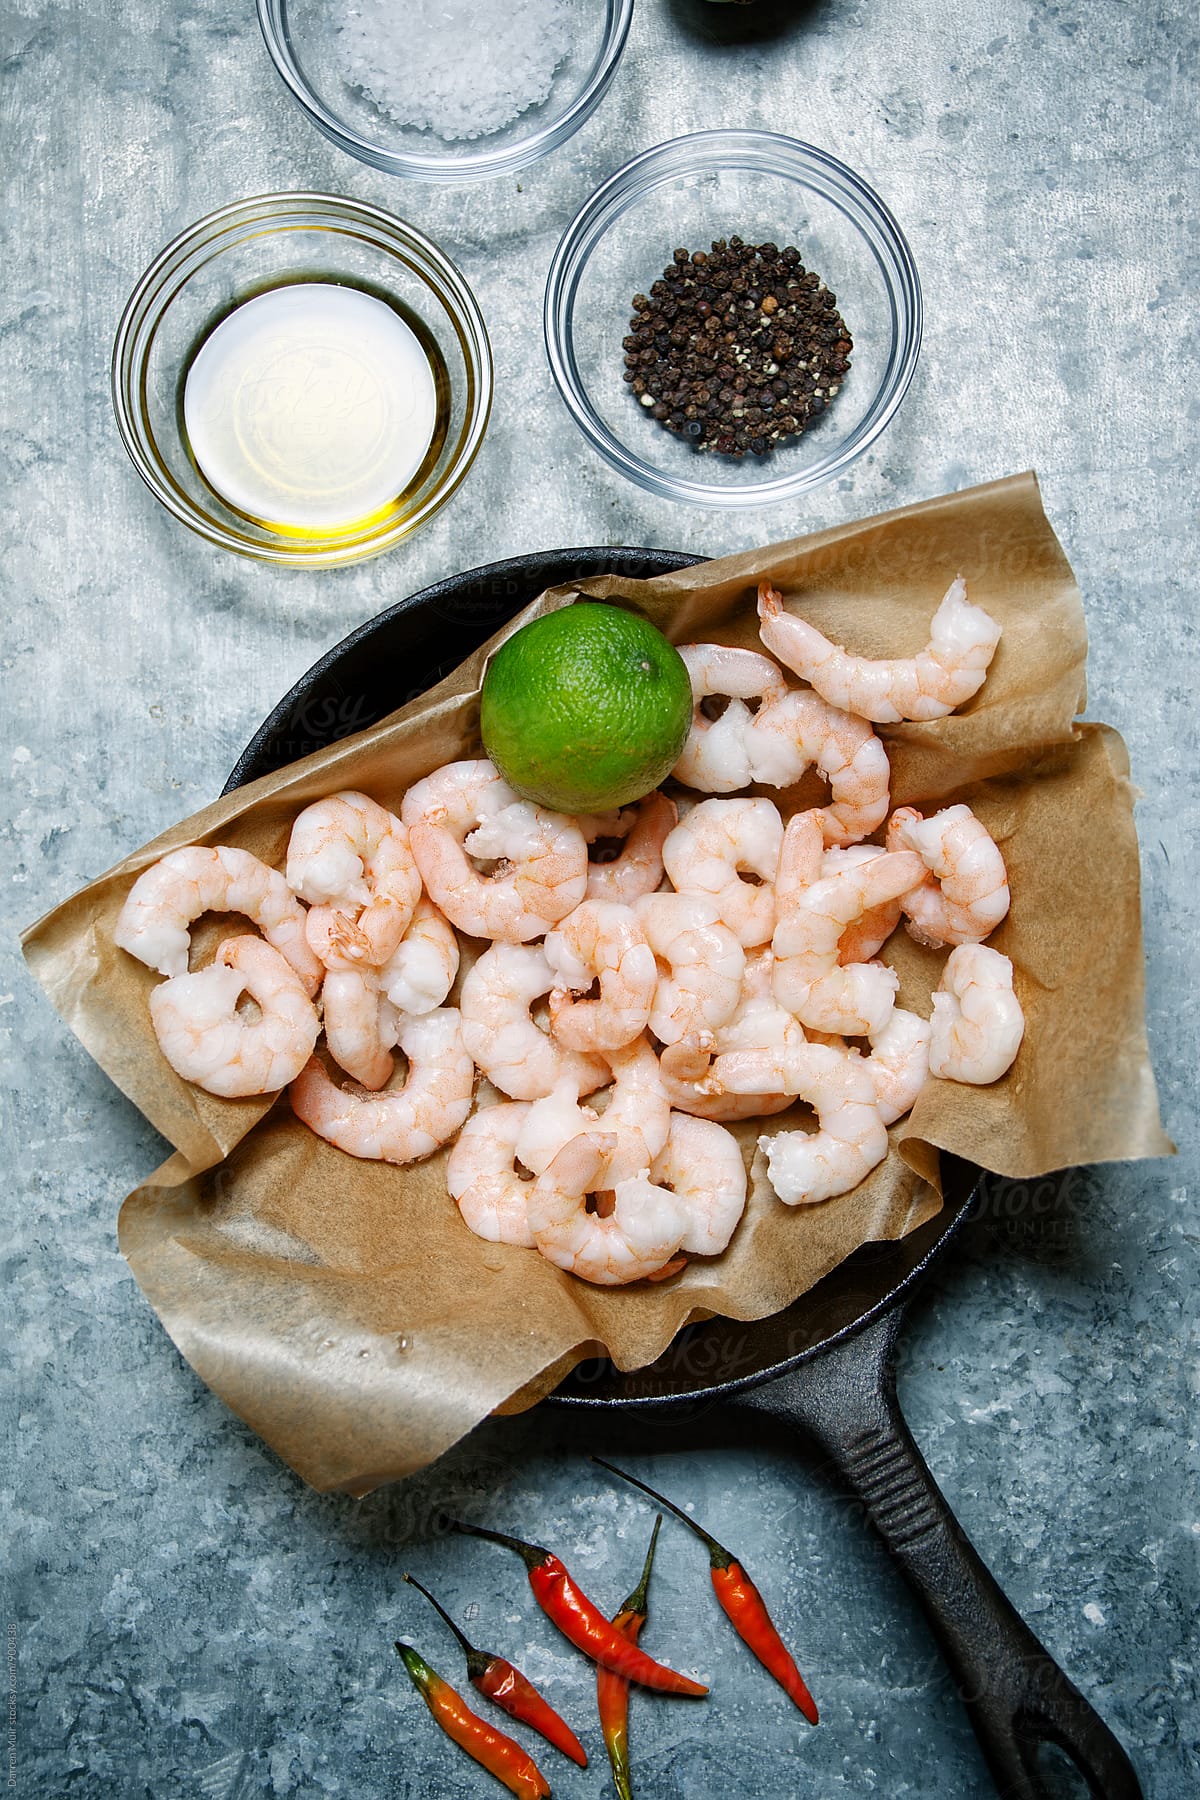 Cooked prawns and ingredients for a chili and lime dressing.